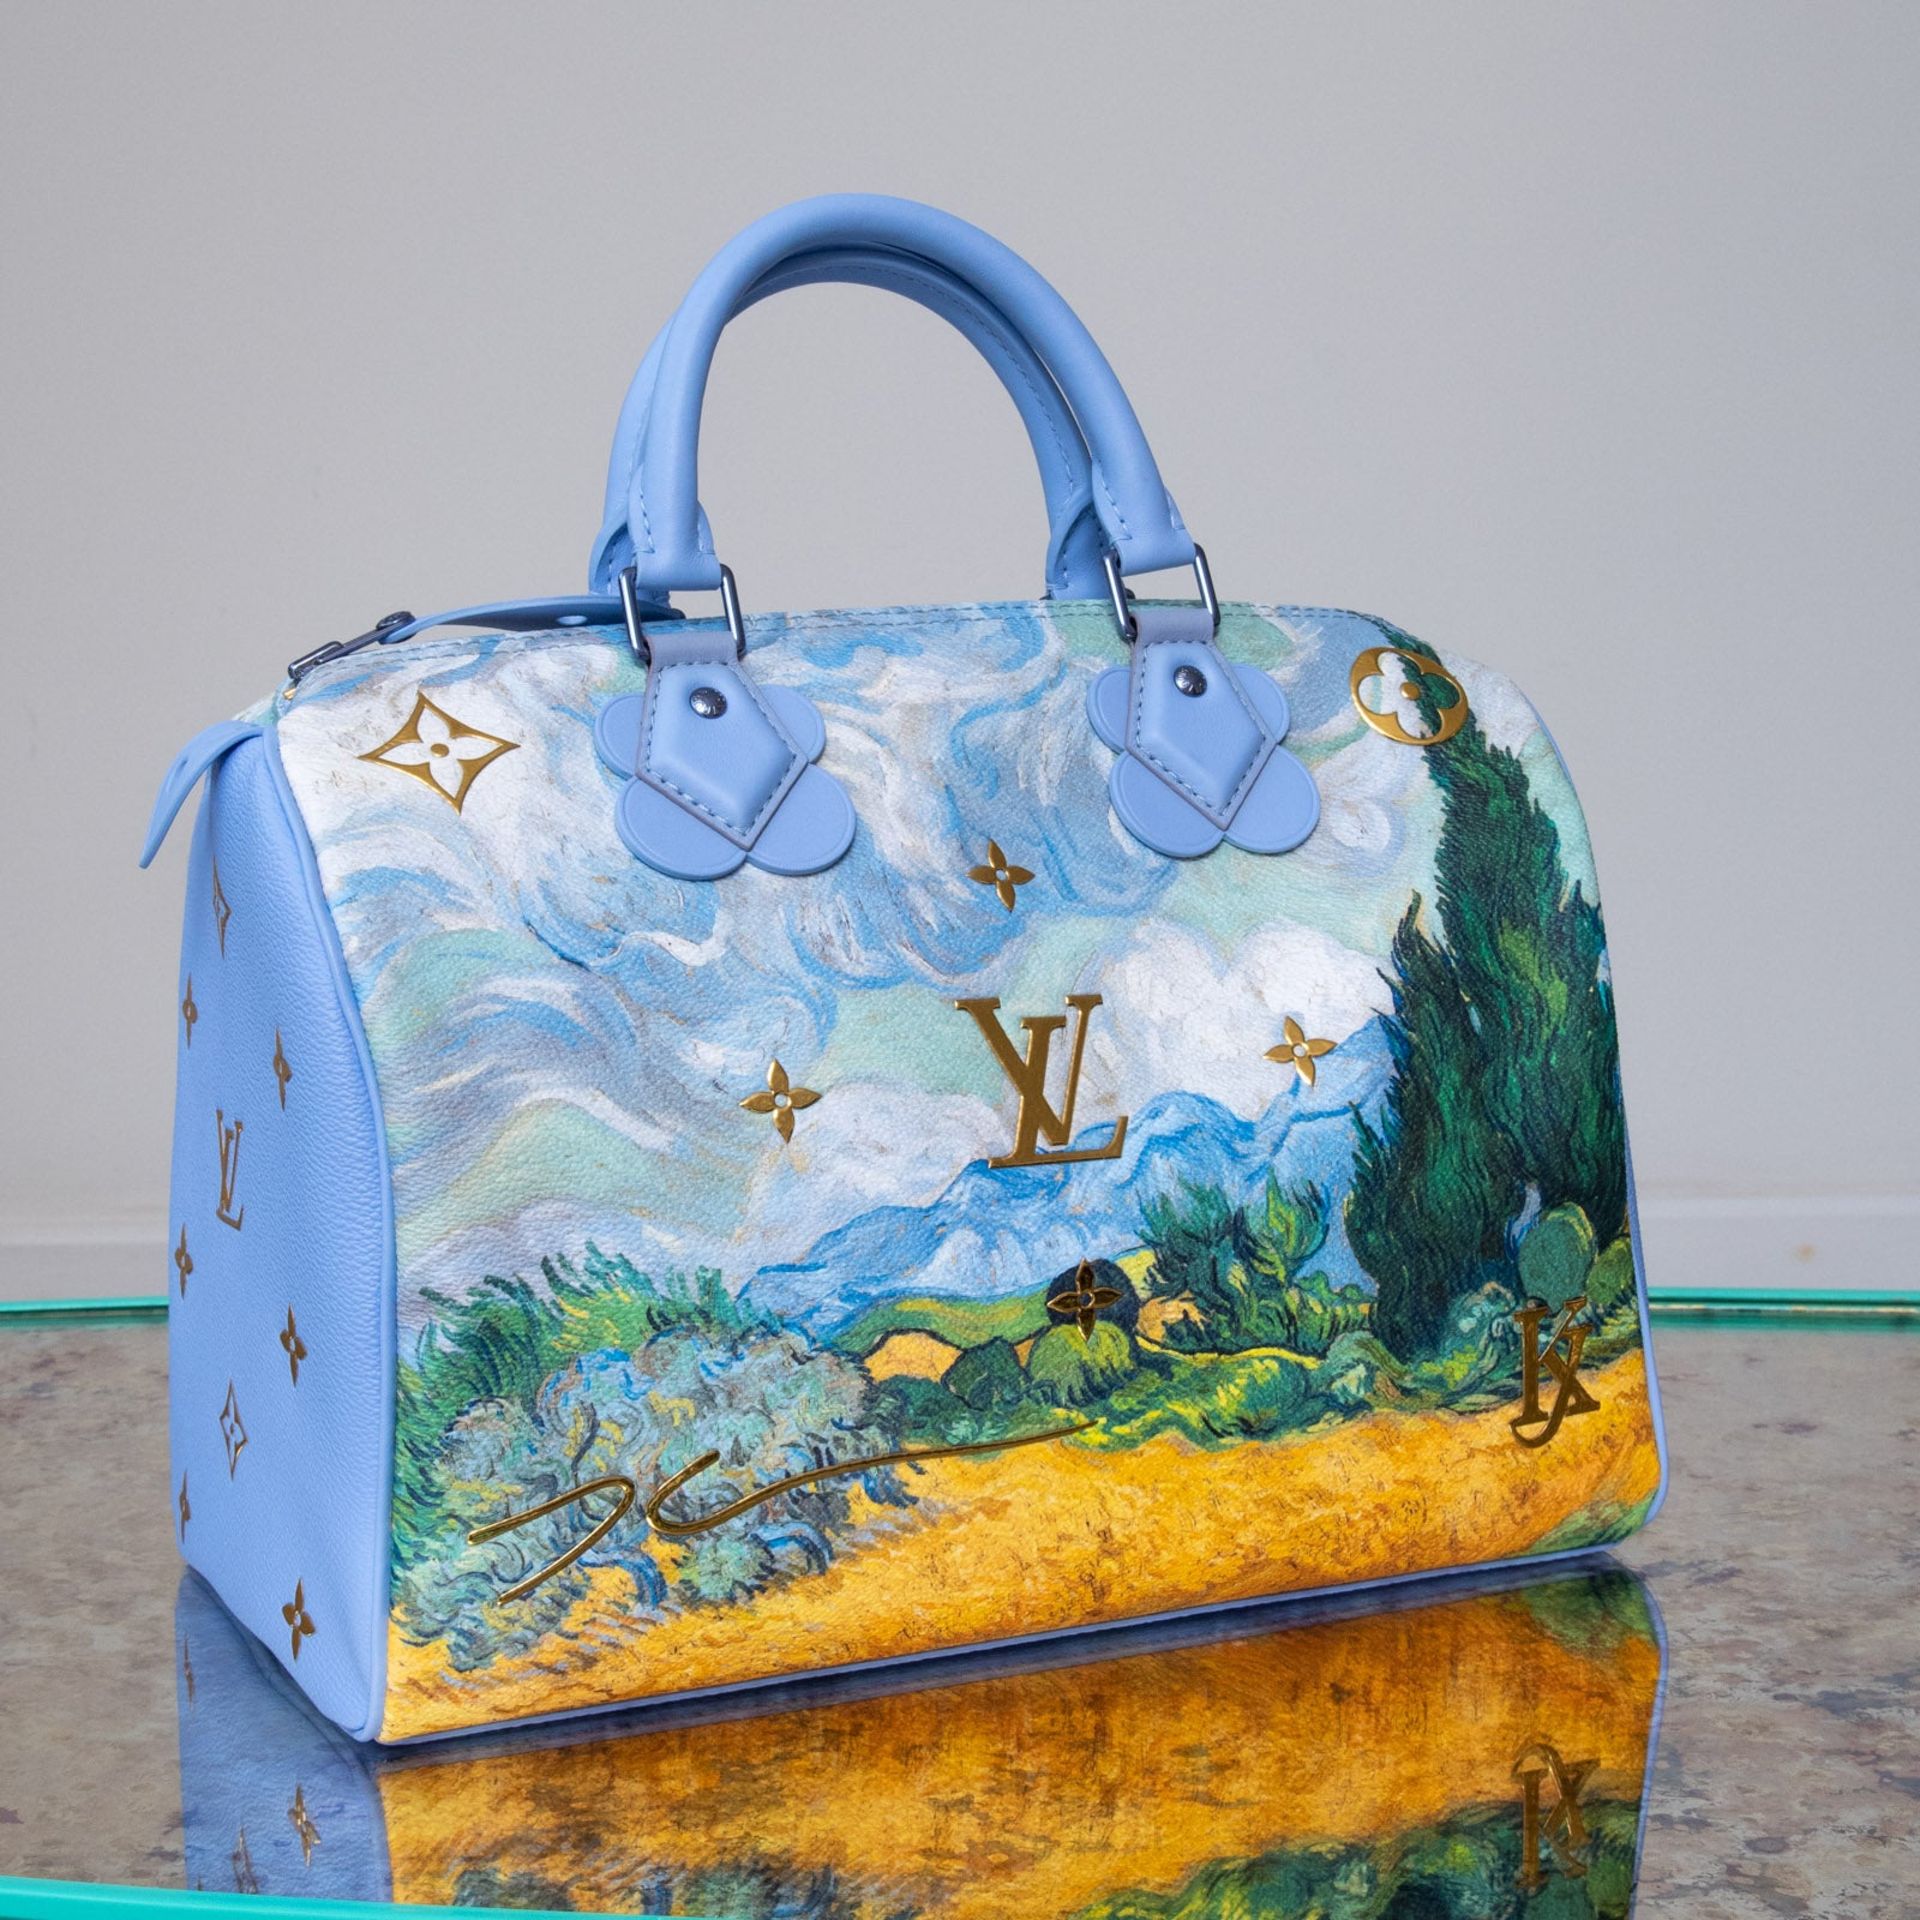 Louis Vuitton Limited Edition Lavender Speedy 30 Jeff Koons Van Gogh Masters Collection - Image 7 of 18